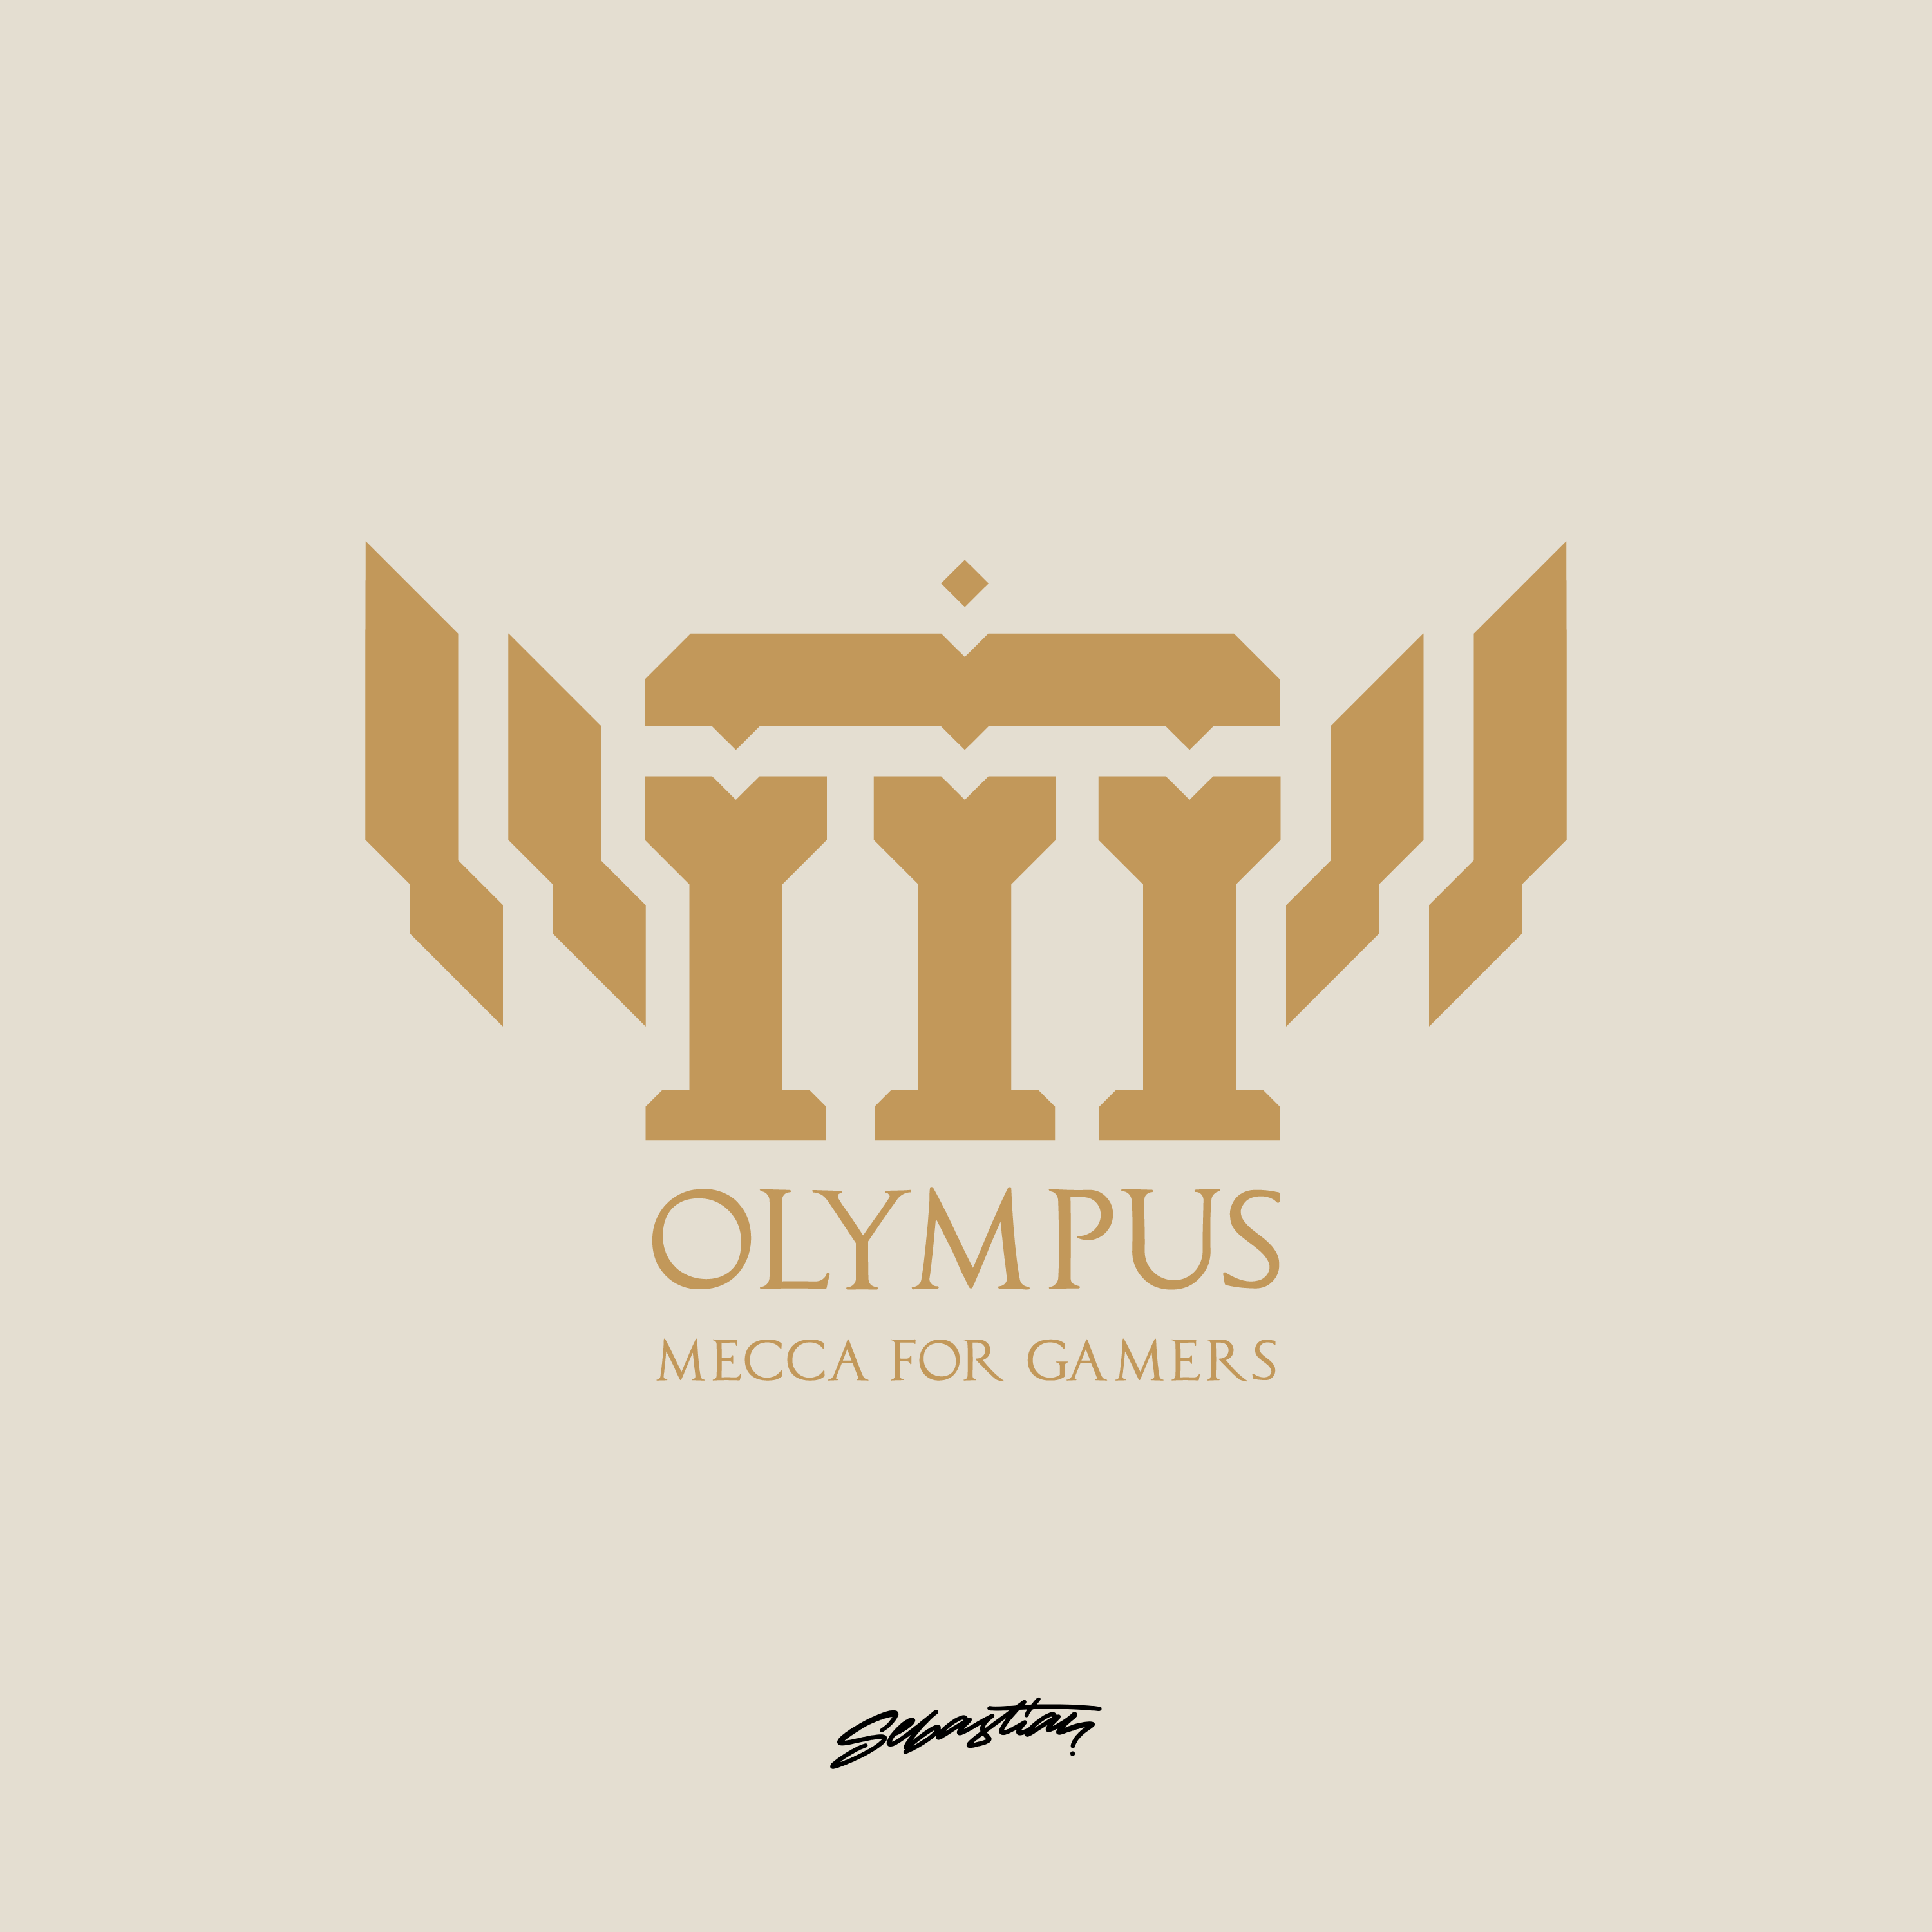 Olympis Logo - Olympus Logo Redesign v2.0 - General Chit-Chat - Olympus Entertainment